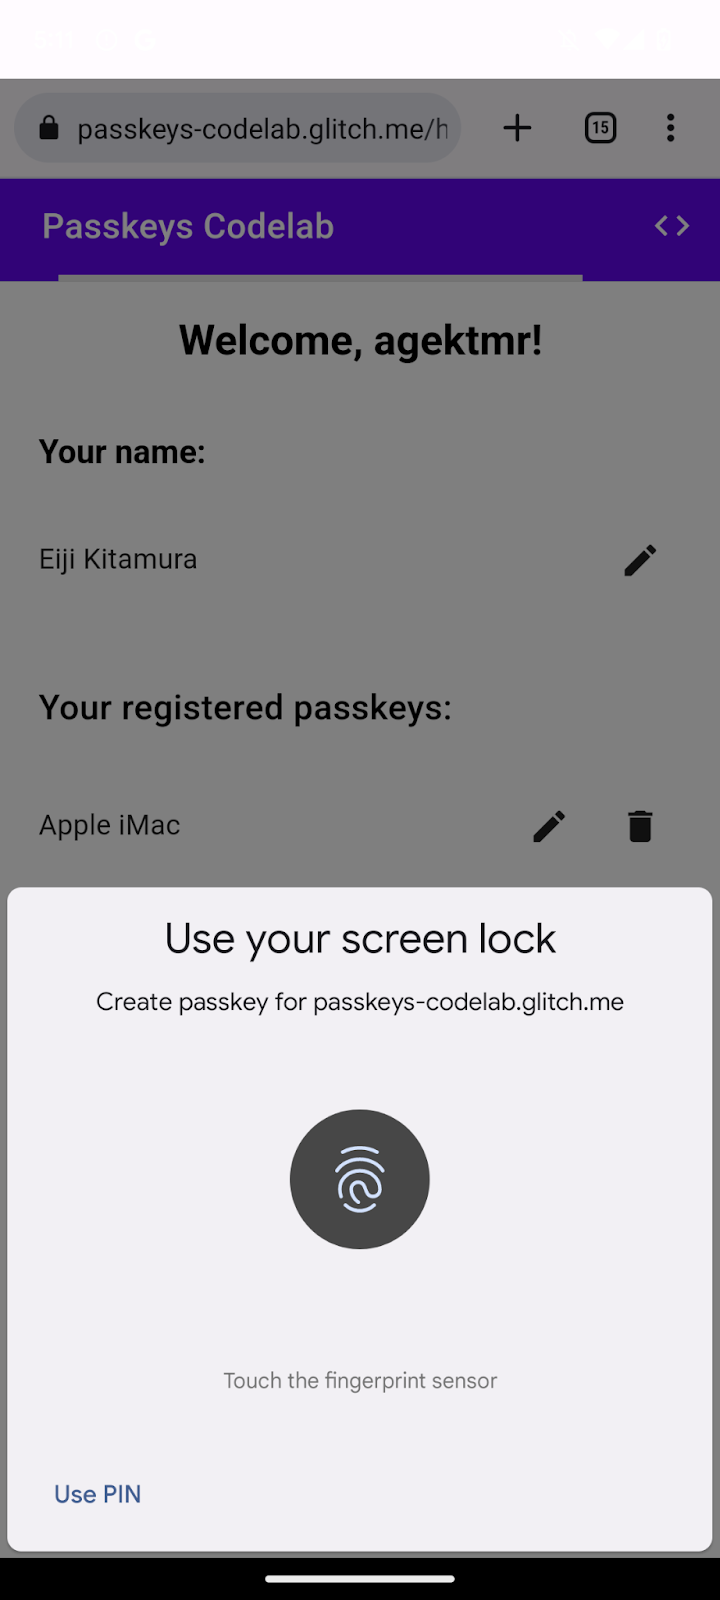 A passkey user verification dialog appears upon passkey creation.